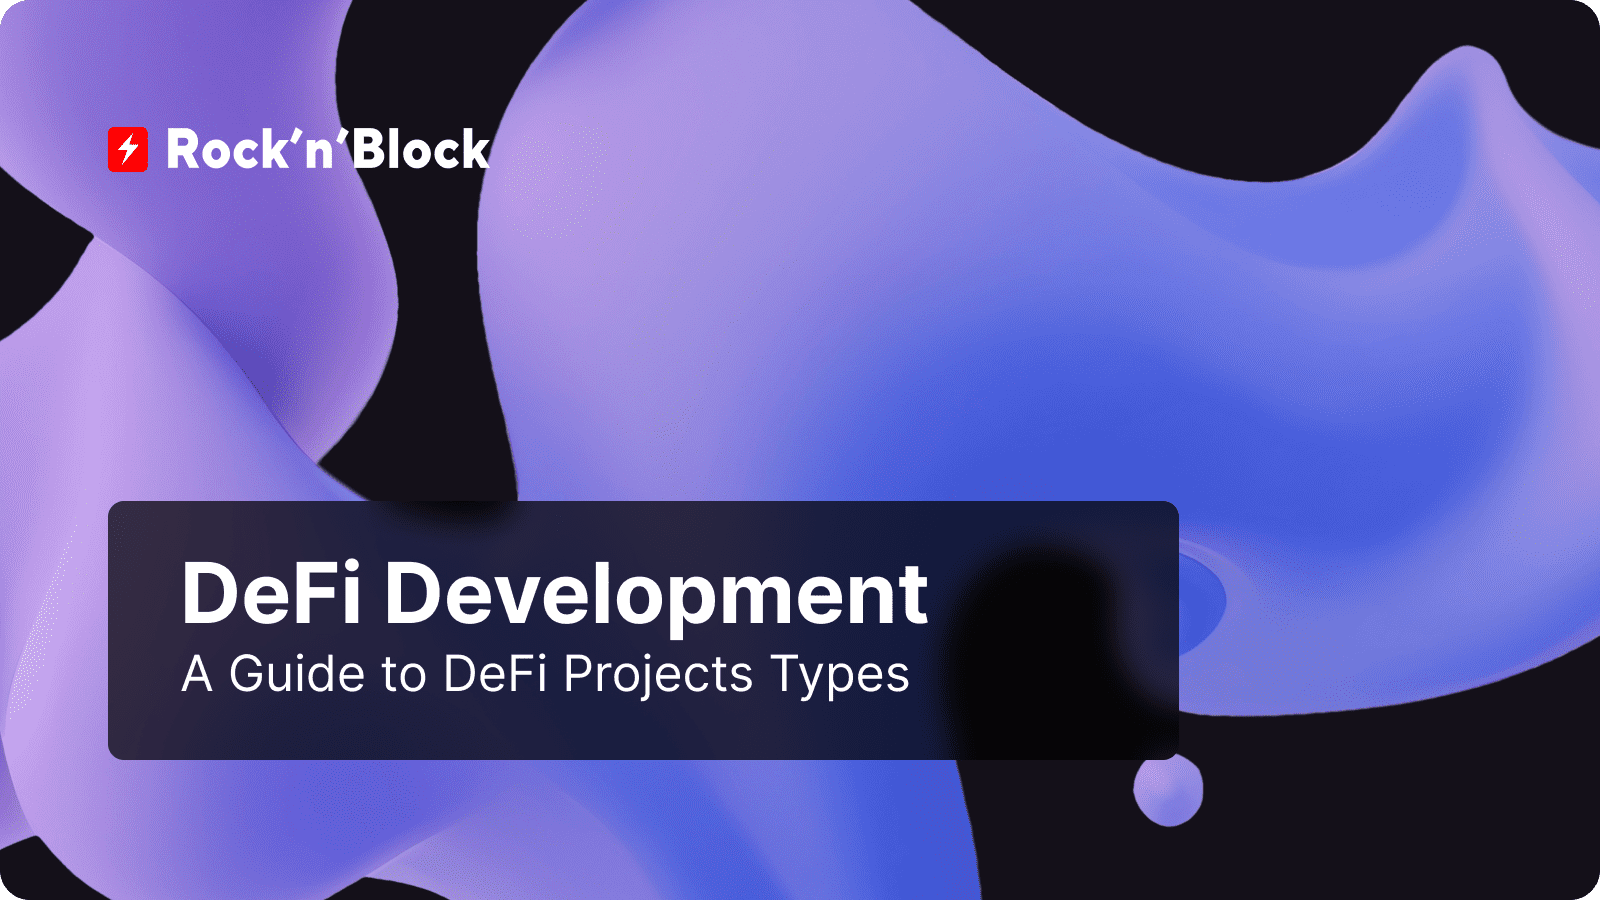 DeFi Development in 2023: Guide to DeFi Projects Types